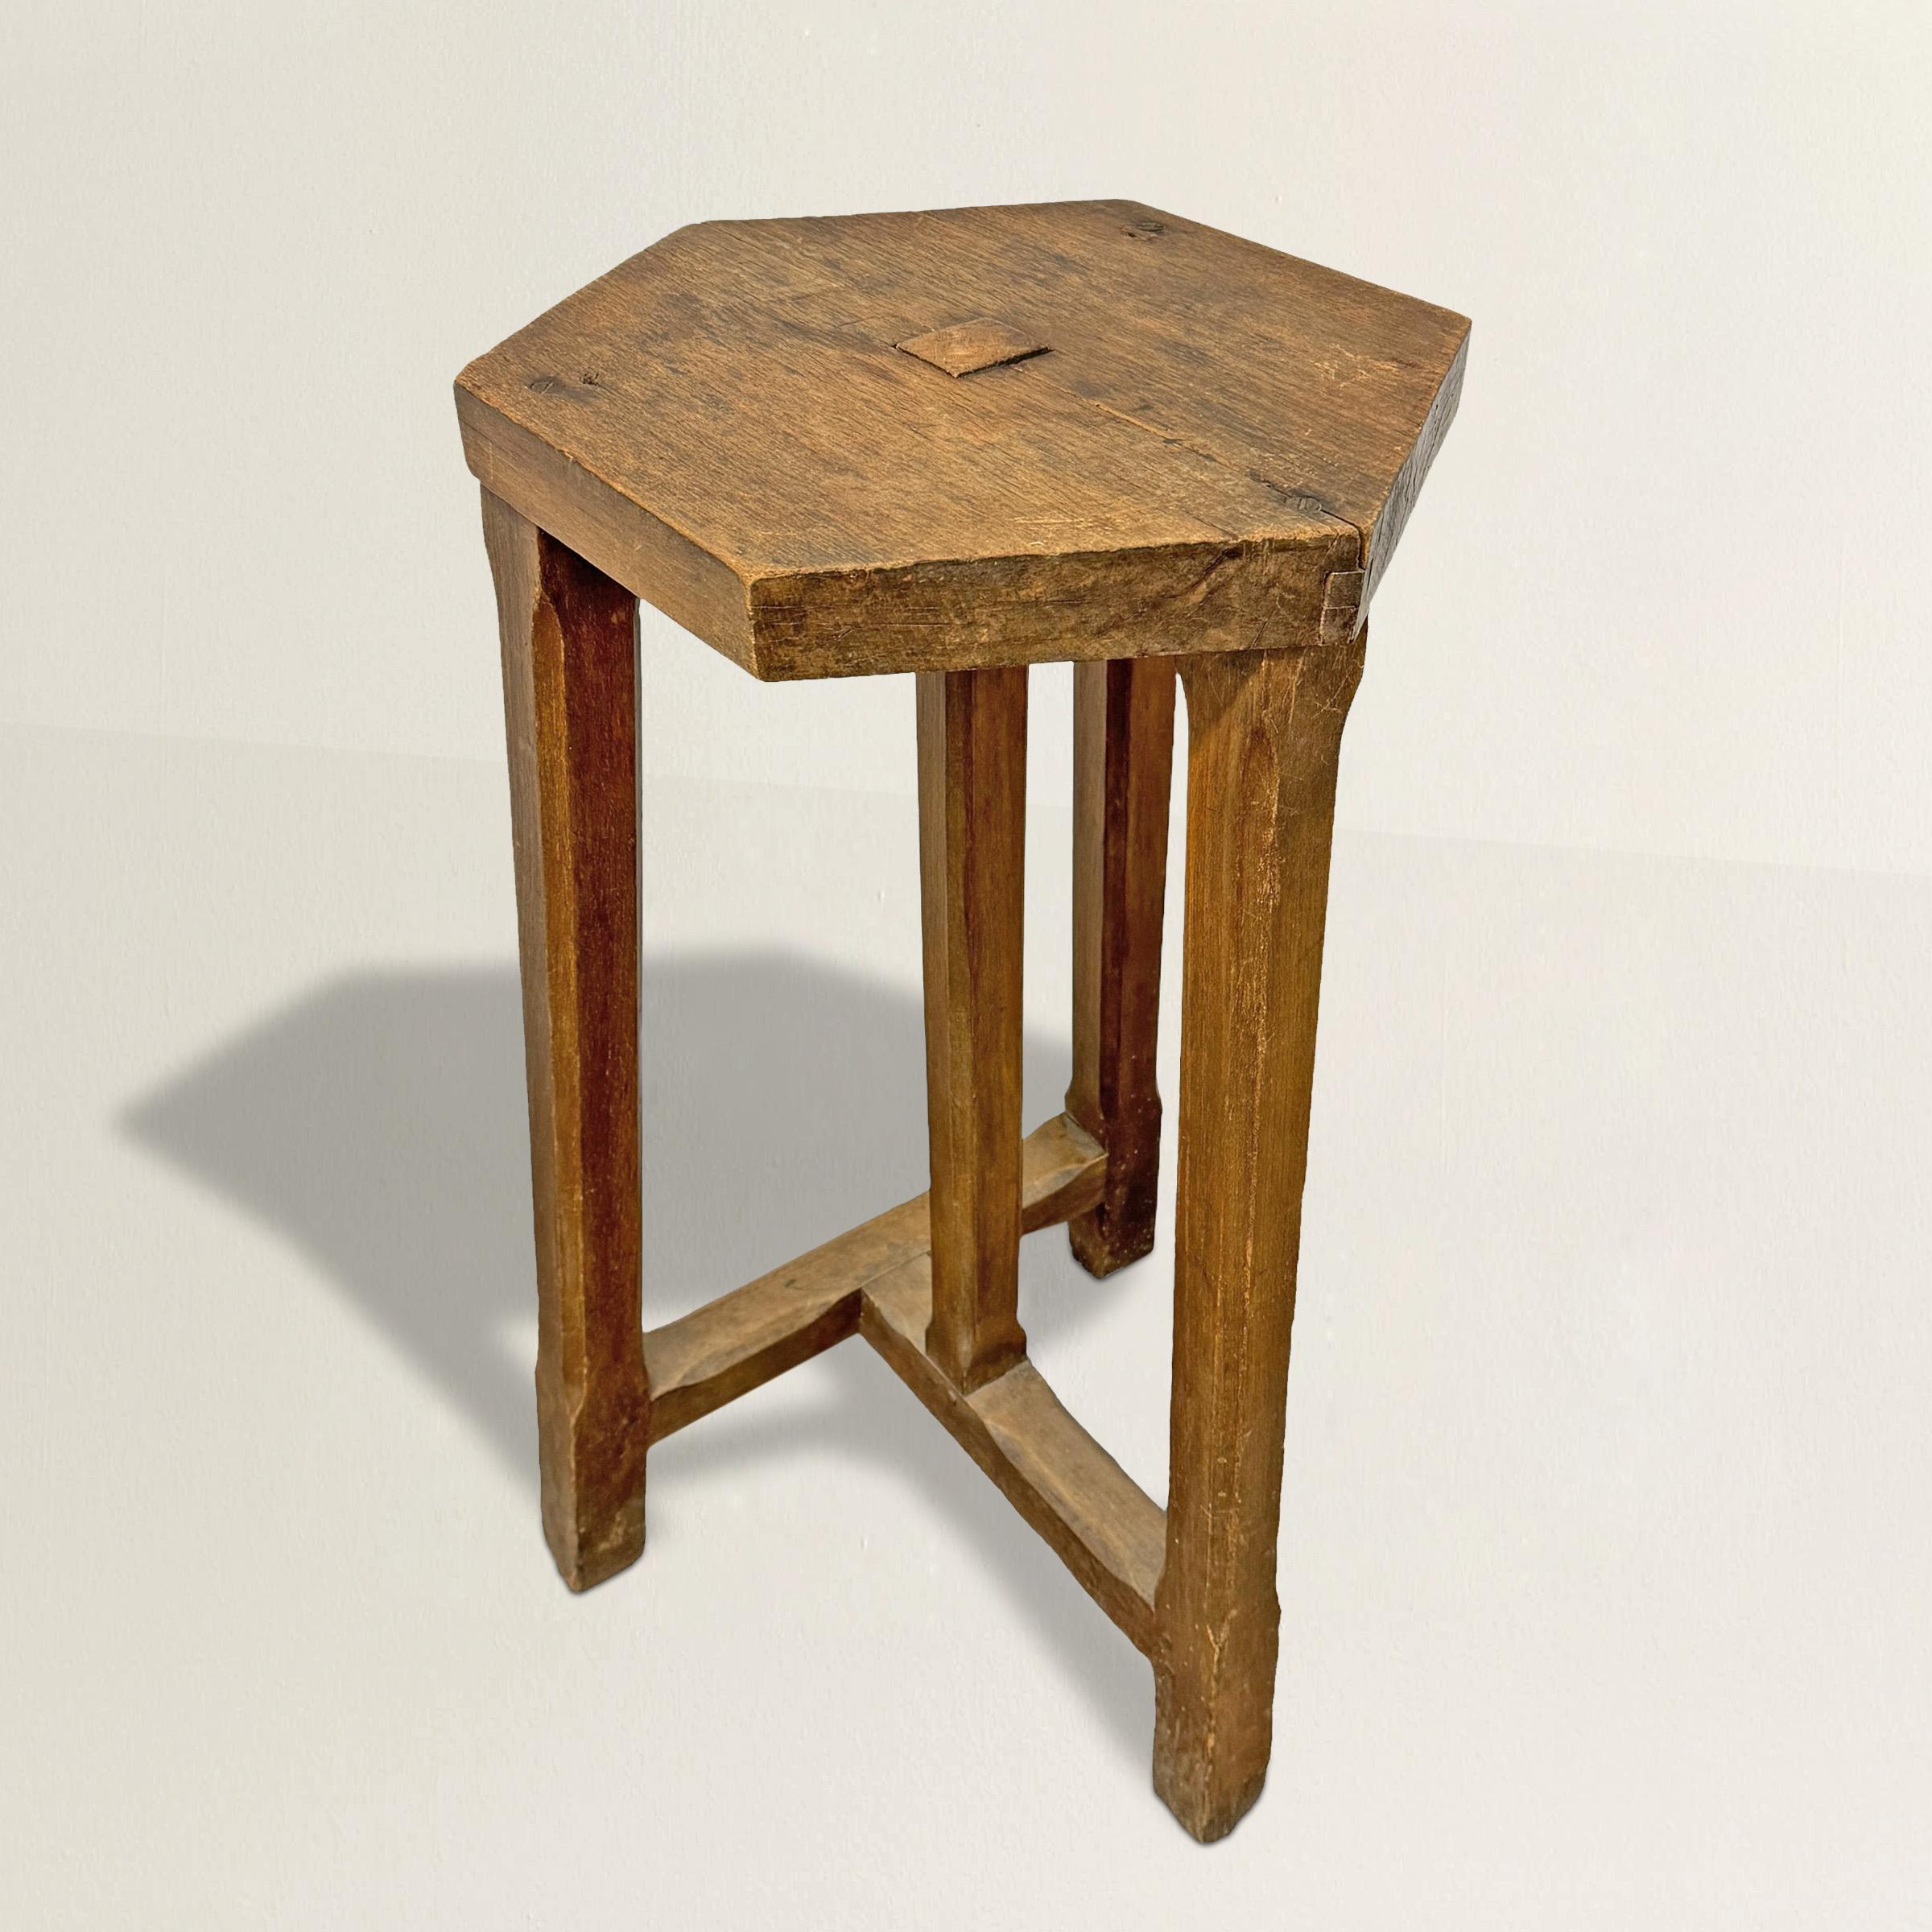 This early 20th-century French artist's sculptor's stand, crafted from oak, is a versatile and elegant piece for displaying your favorite artwork, plant, or beverage. Its hexagonal top is set over an asymmetrical base with three square, chamfered